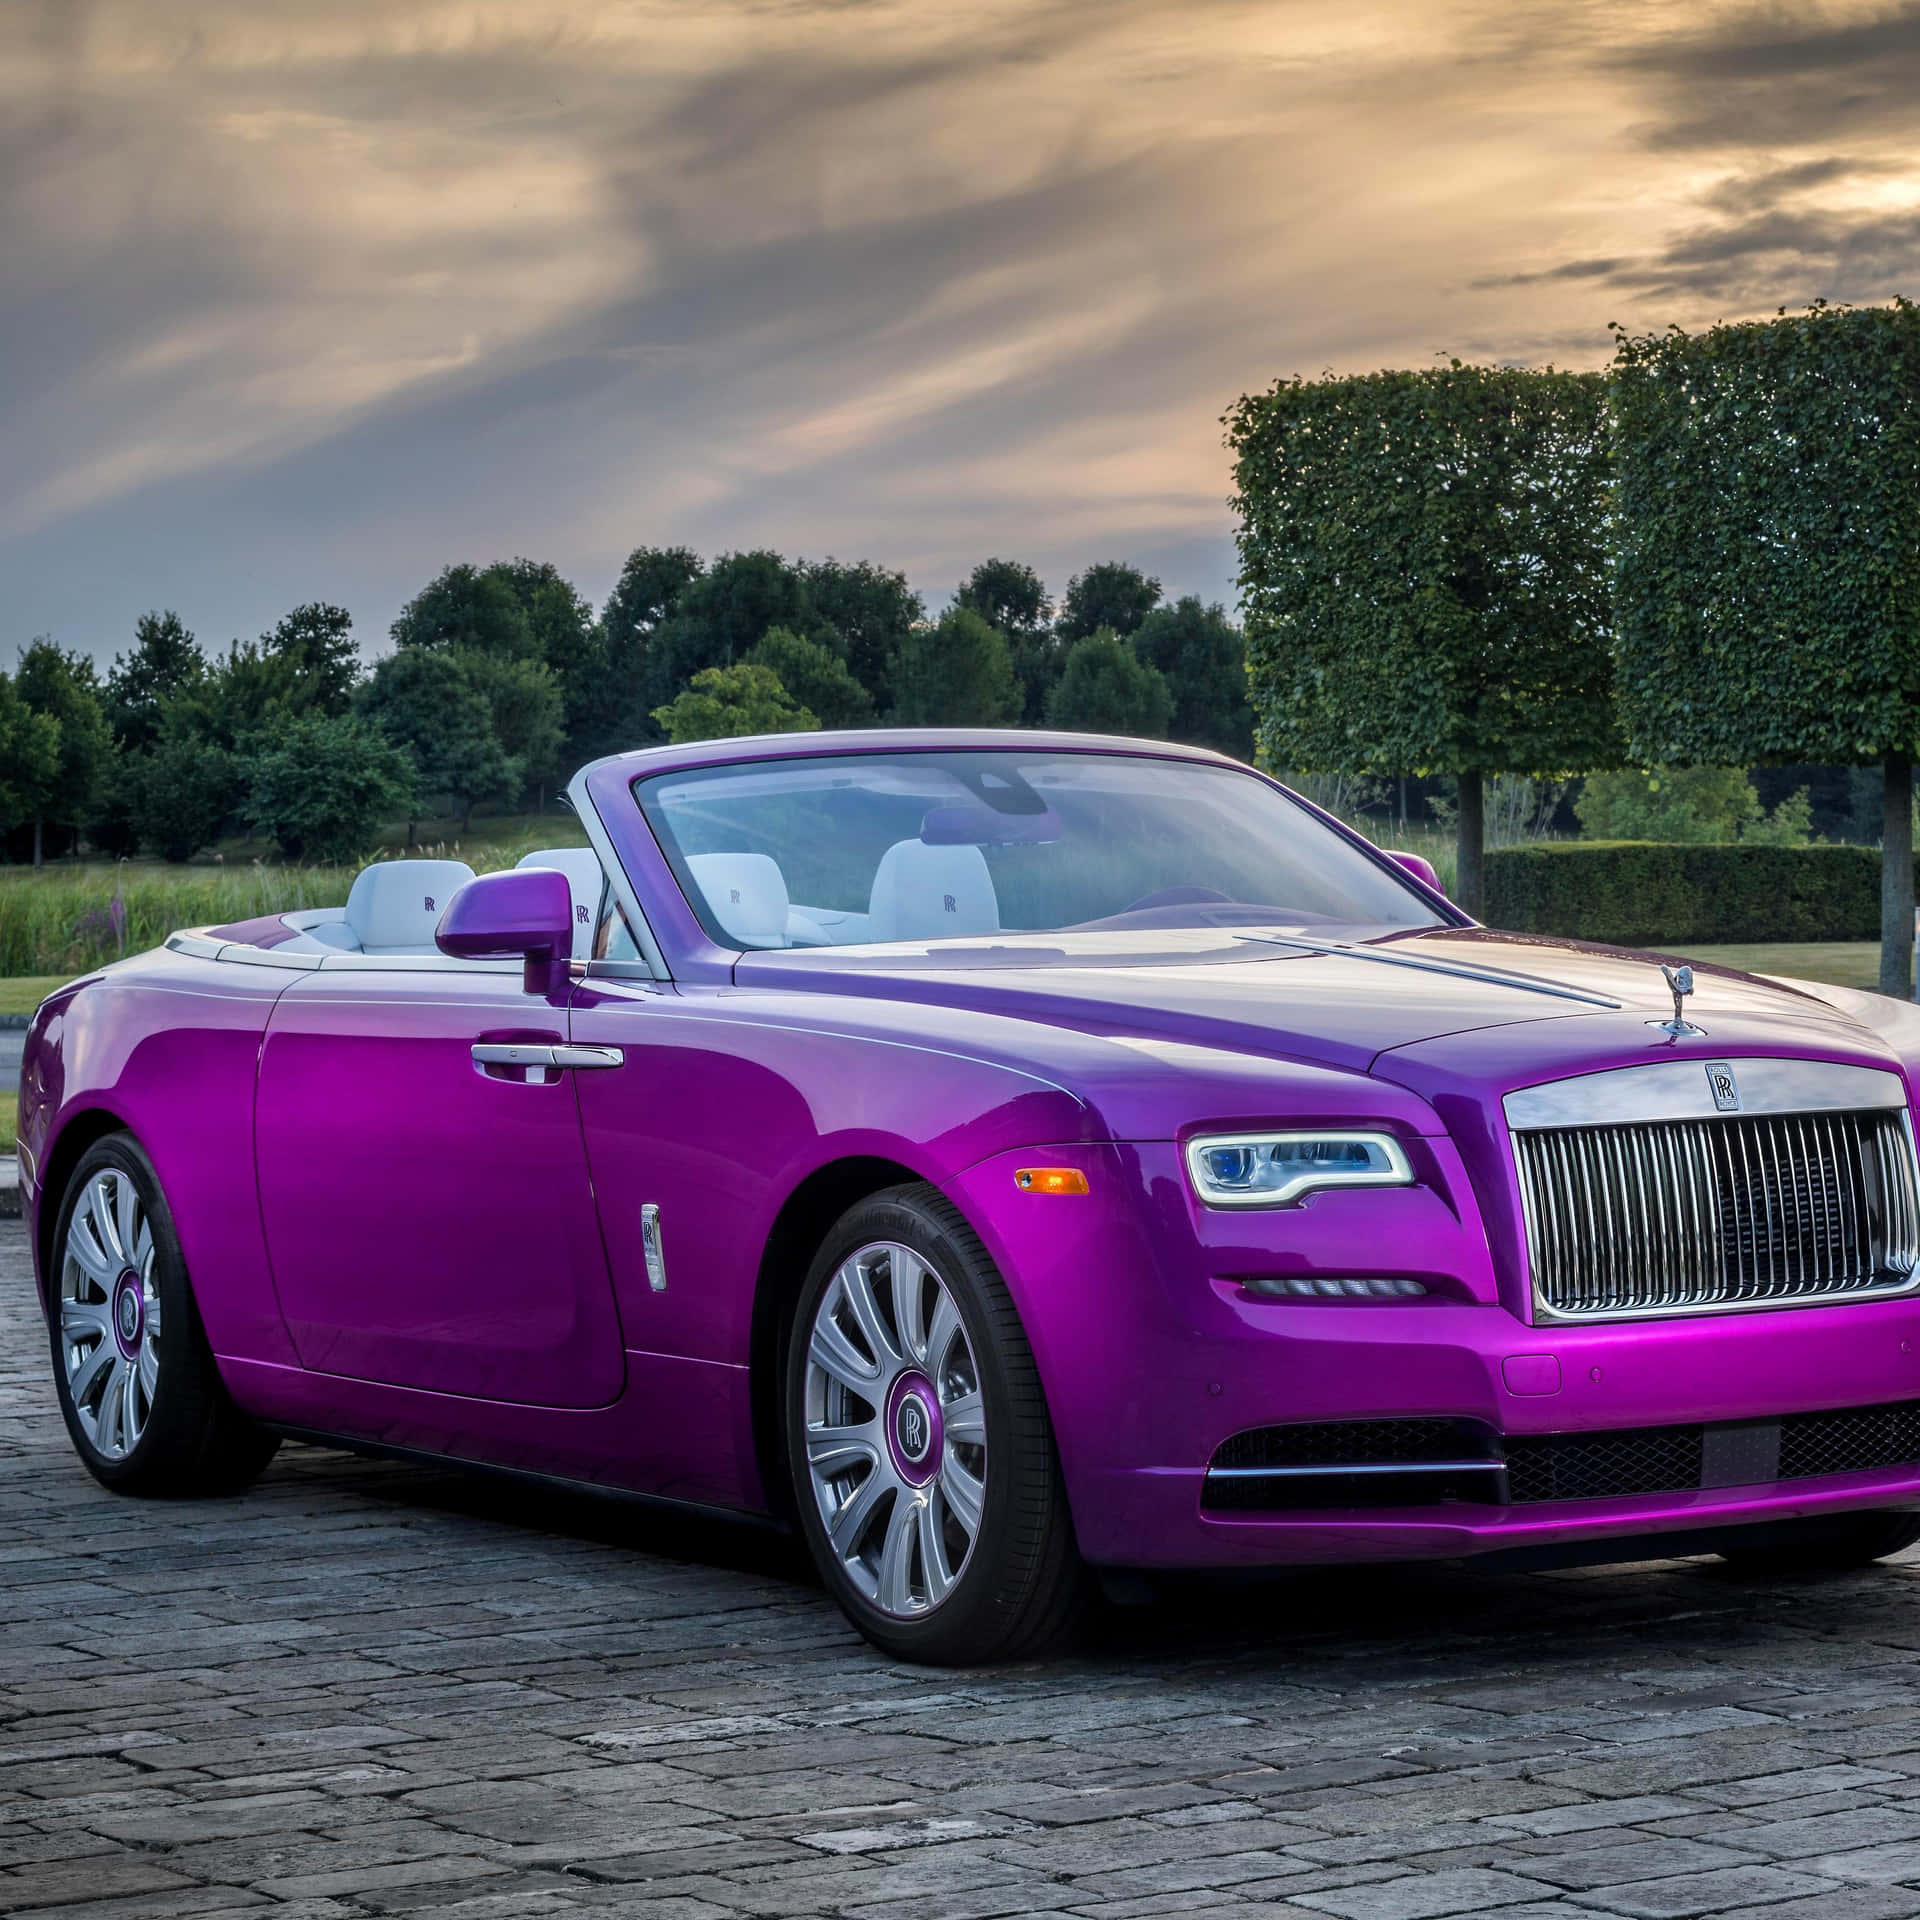 The new Rolls Royce Dawn customized completely by Mansory Custom full  leather interior in pink with blue and white accents  a fading   Instagram